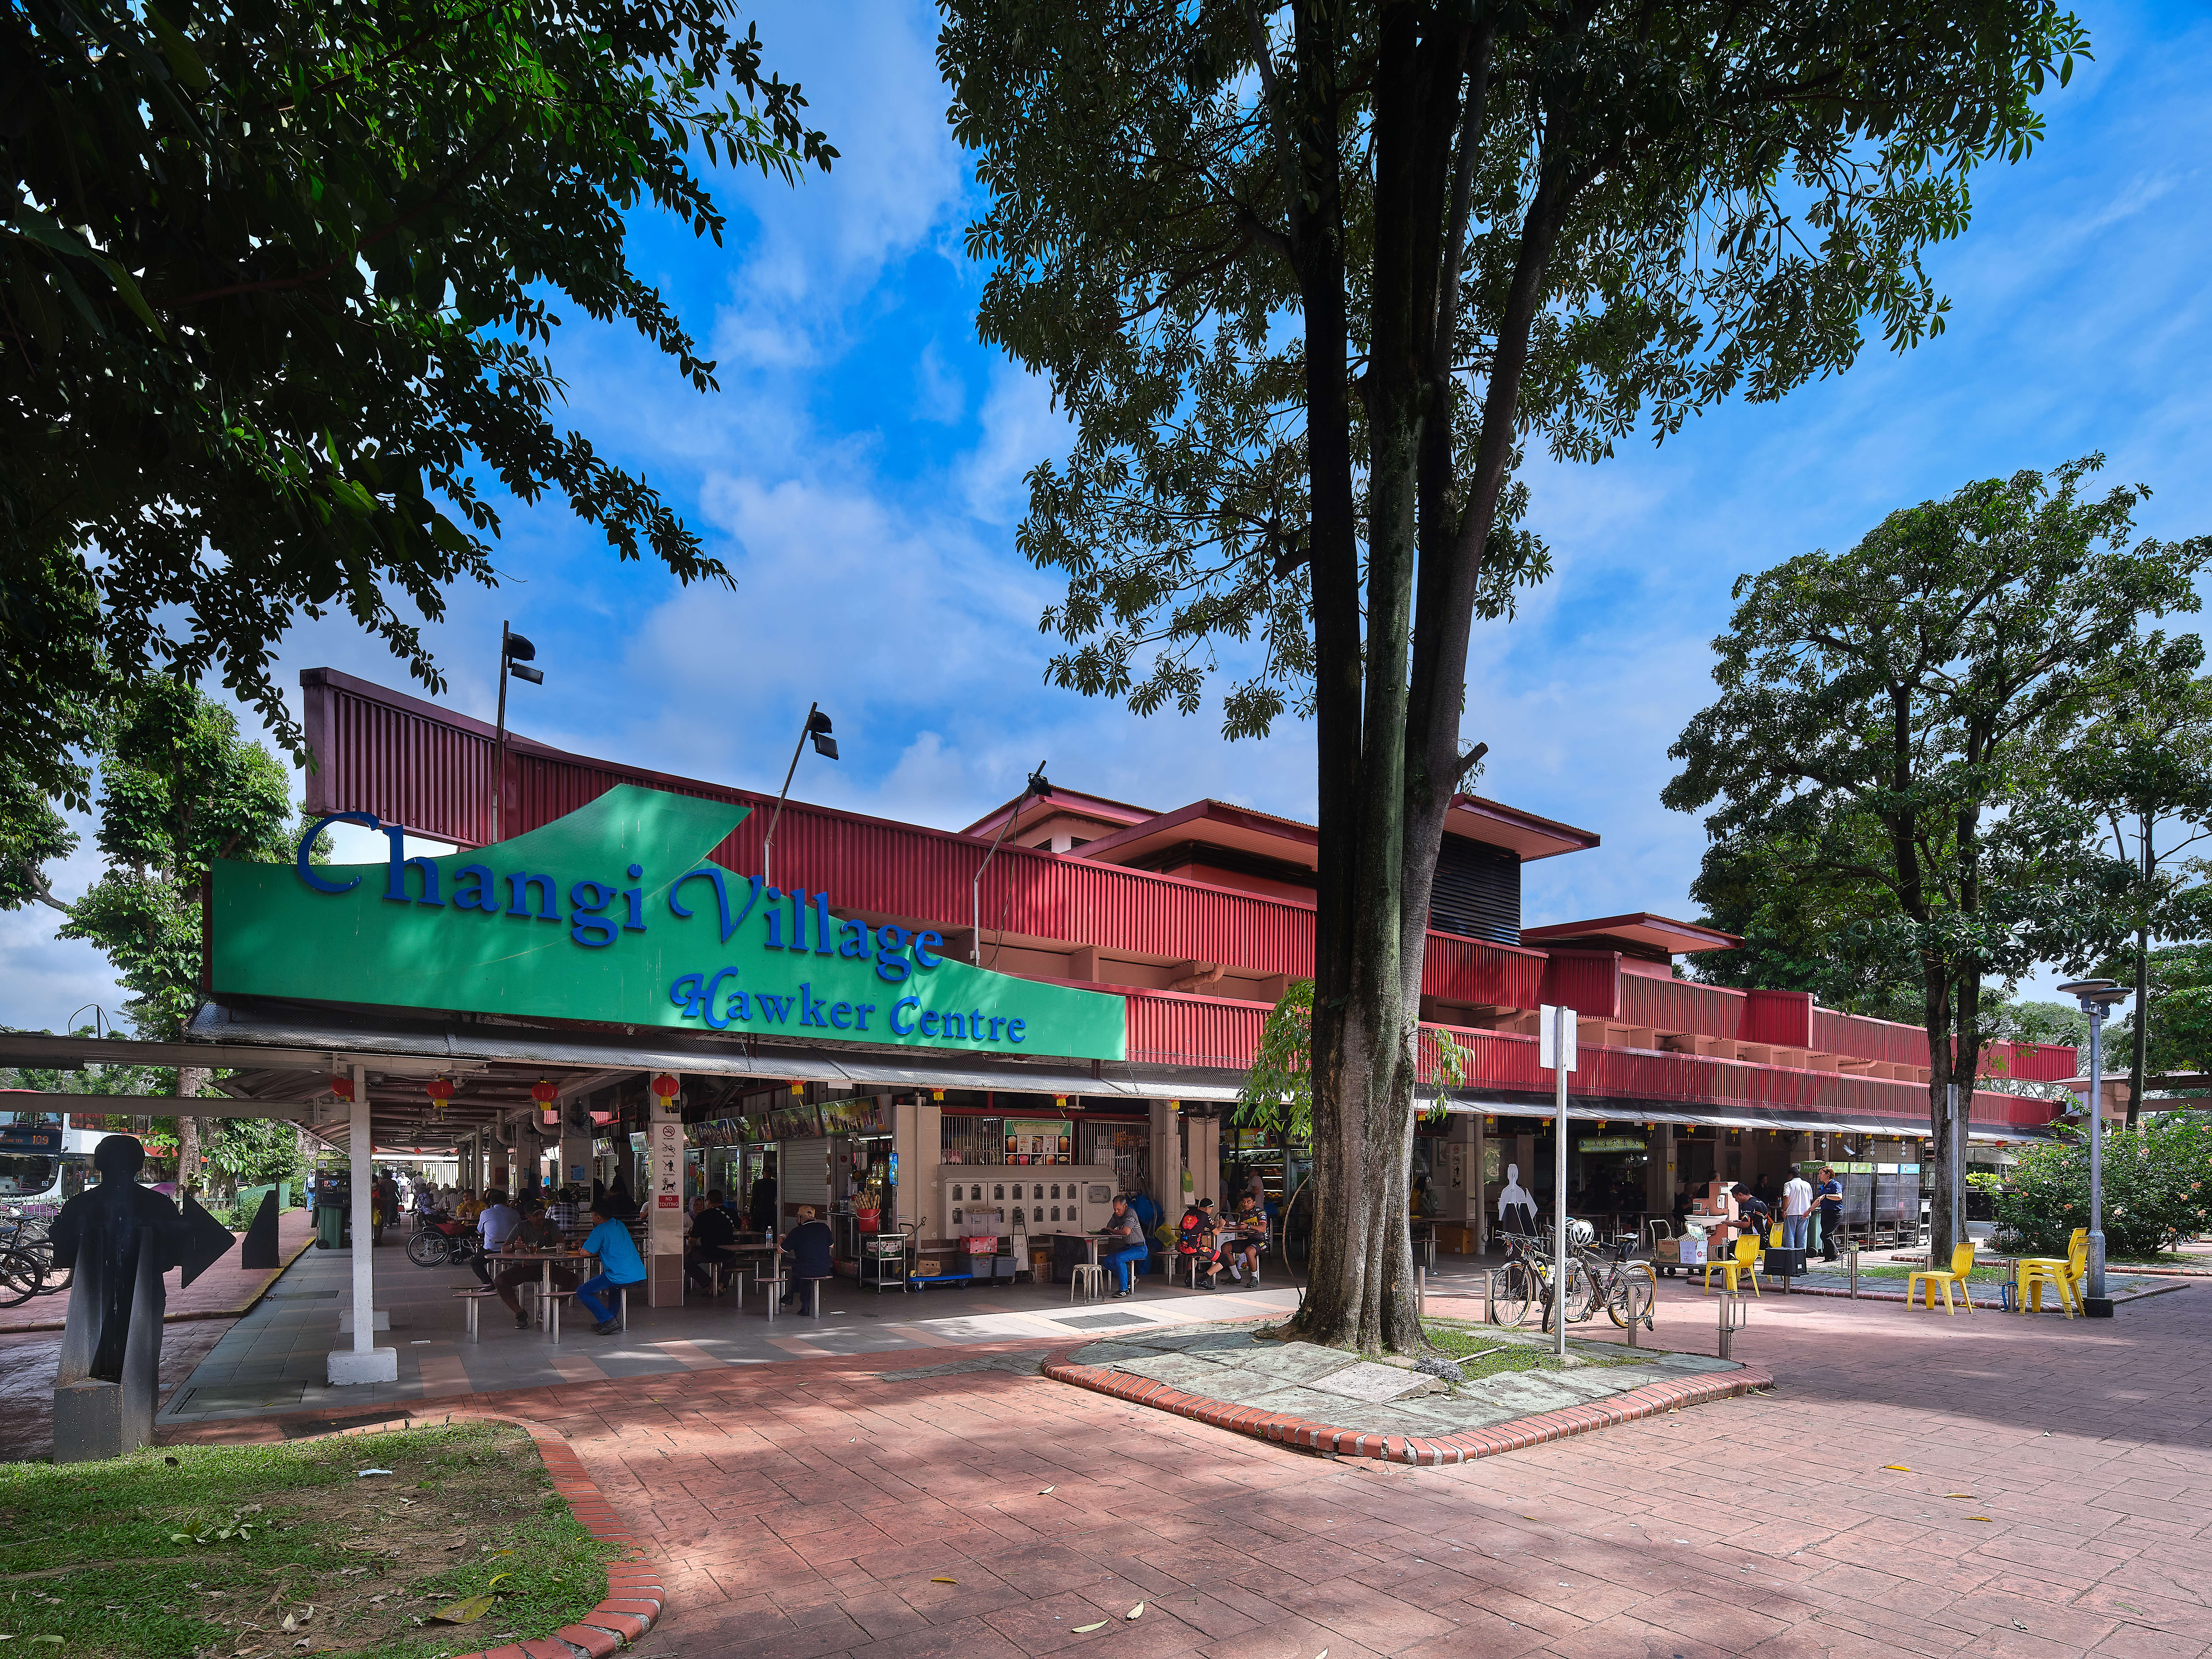 With the completion of Changi Cantonment in 1937, Changi Village grew significantly as traders and hawkers established themselves and catered to the base’s personnel, offering goods and services that earned the village a reputation as a retail haven.